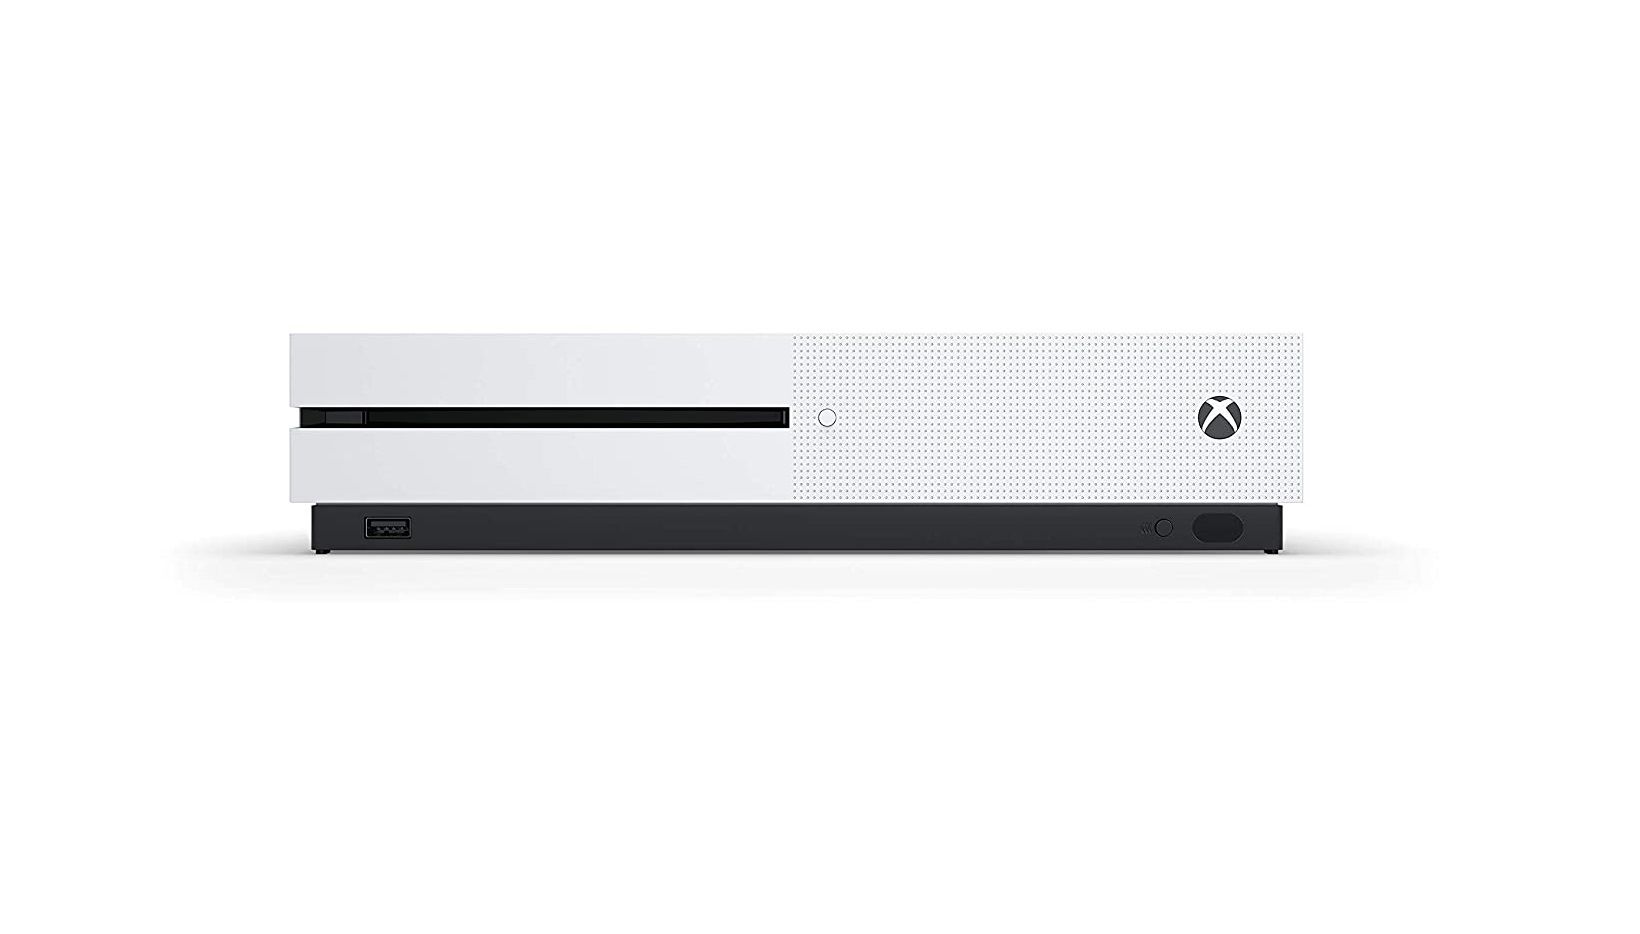 View of Xbox One S from the front